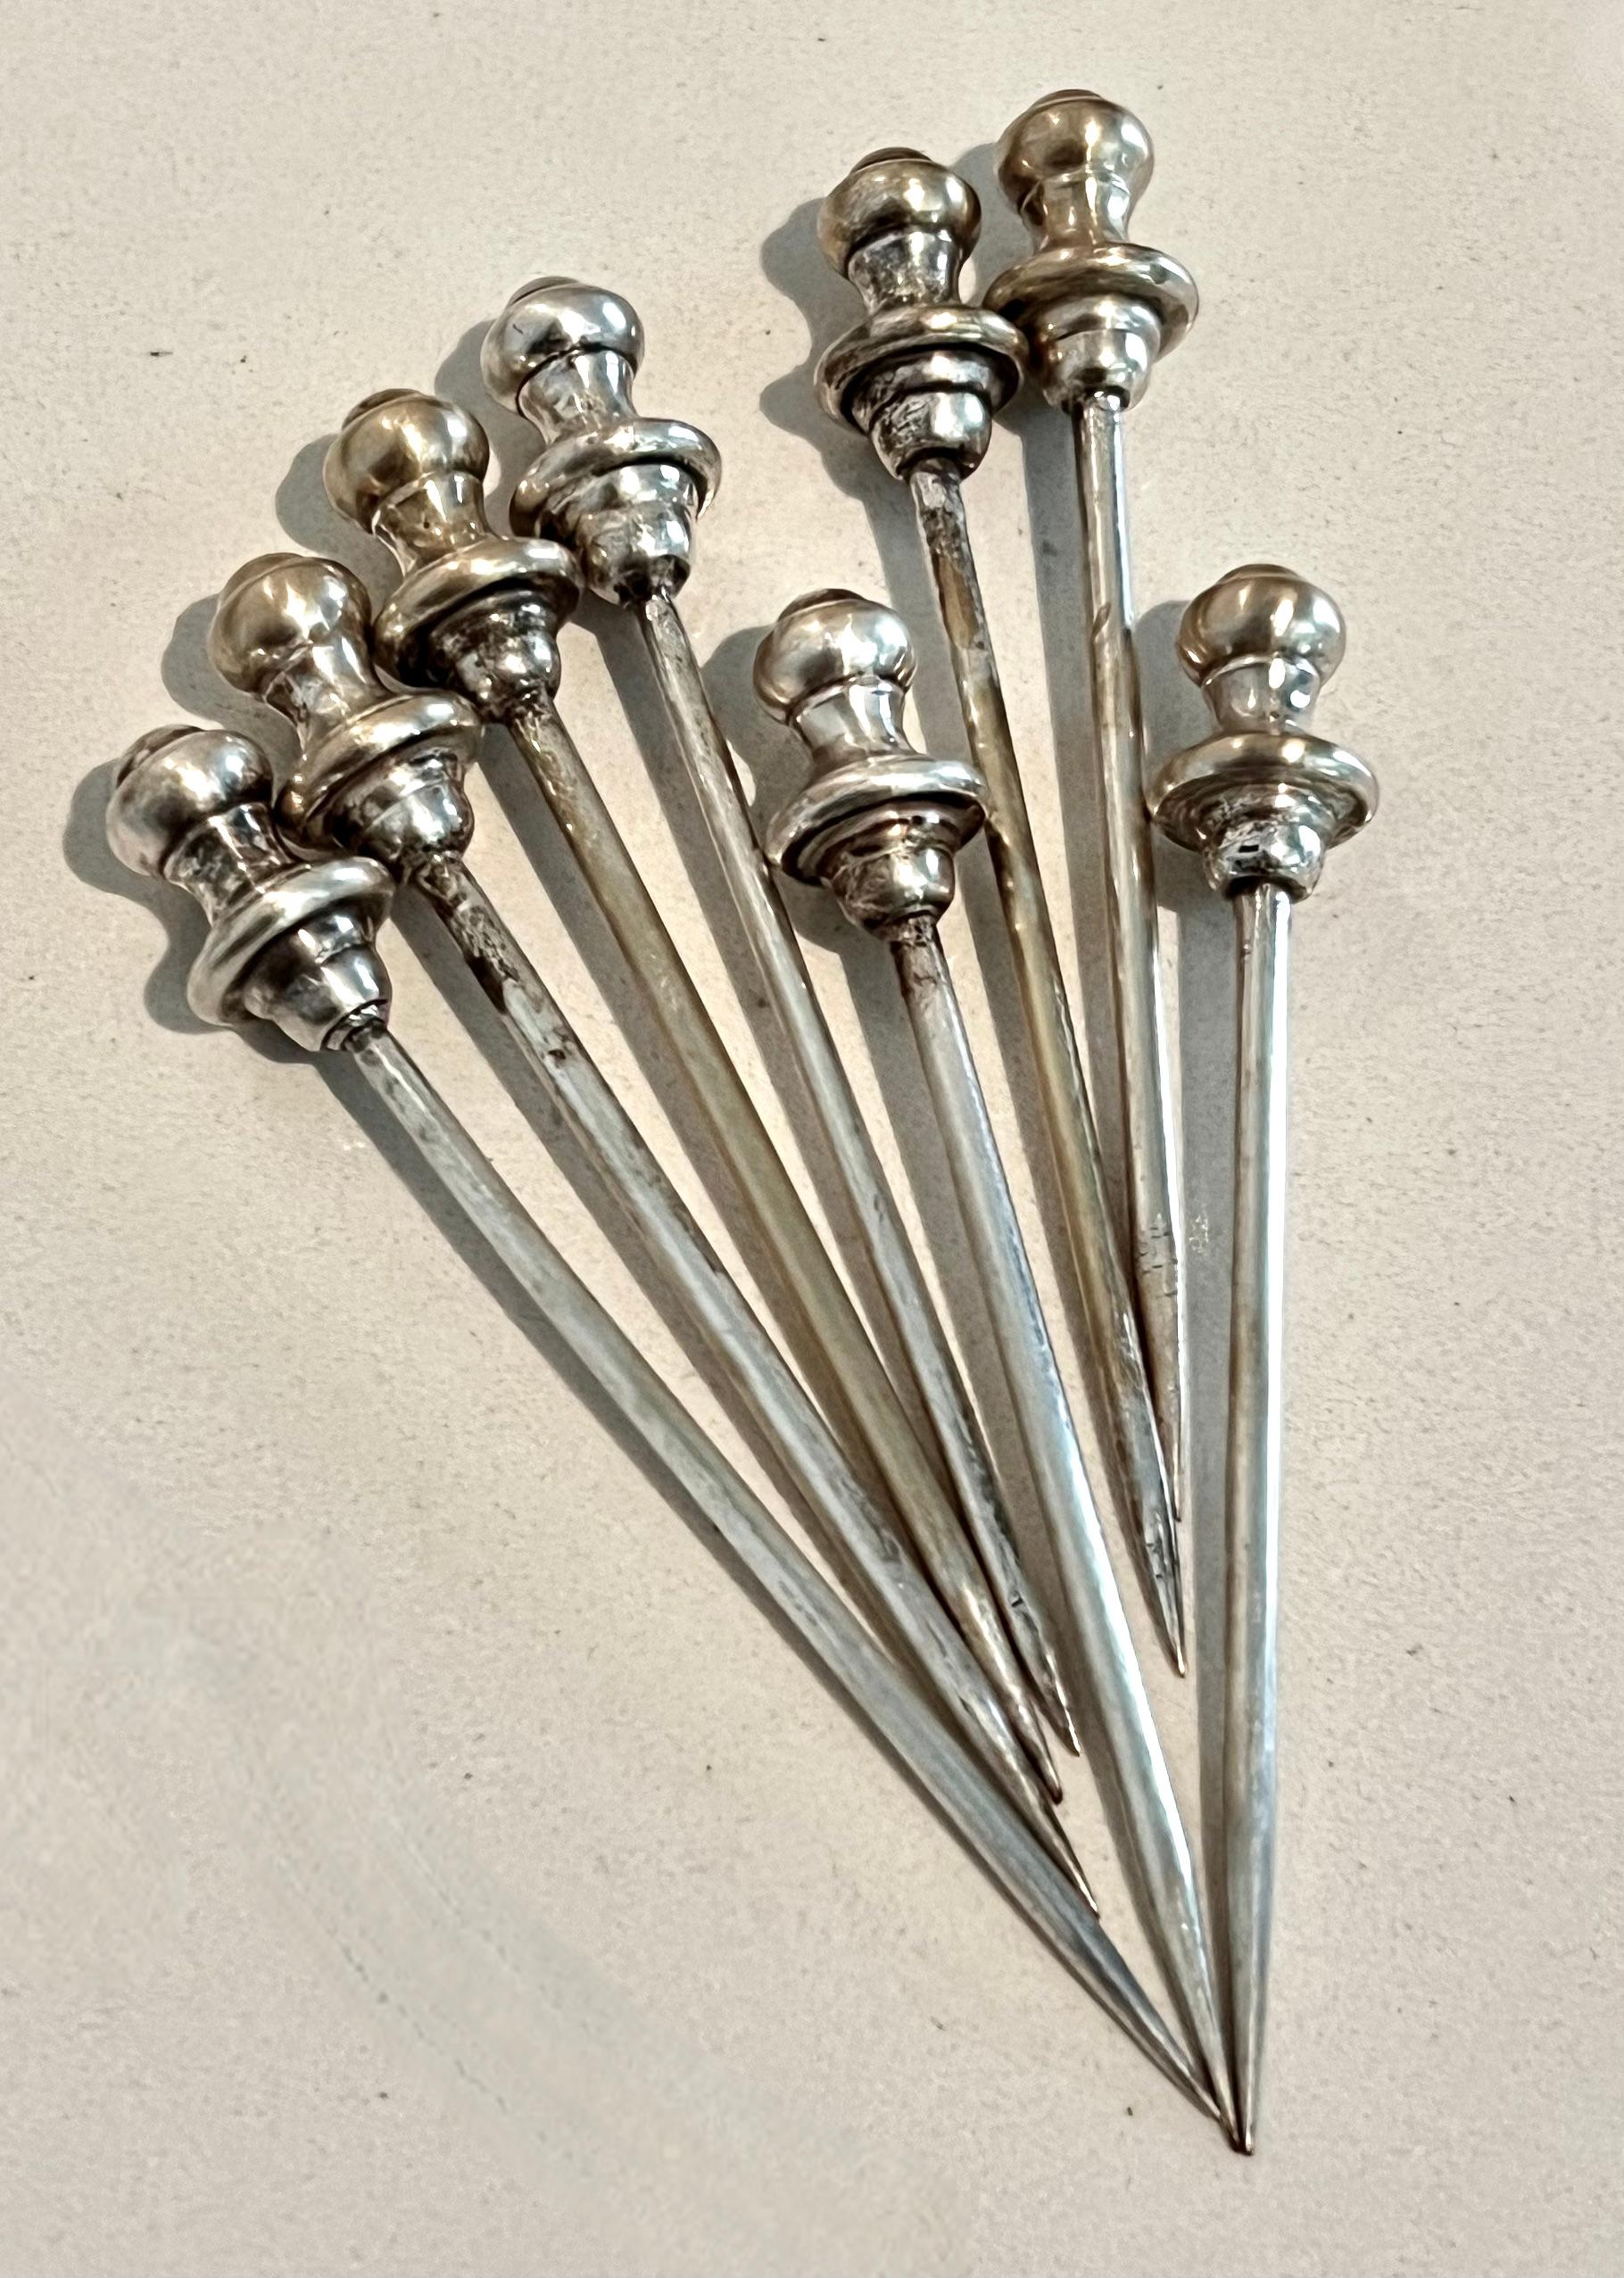 Sheffield silver pick holder with 8 silver plate cocktail picks - a compliment to any bar!

the Sheffield piece is a trophy or urn style holder with small Lions with Rings on either side.  inside are 8 sophisticated silver plate picks.

The set is a